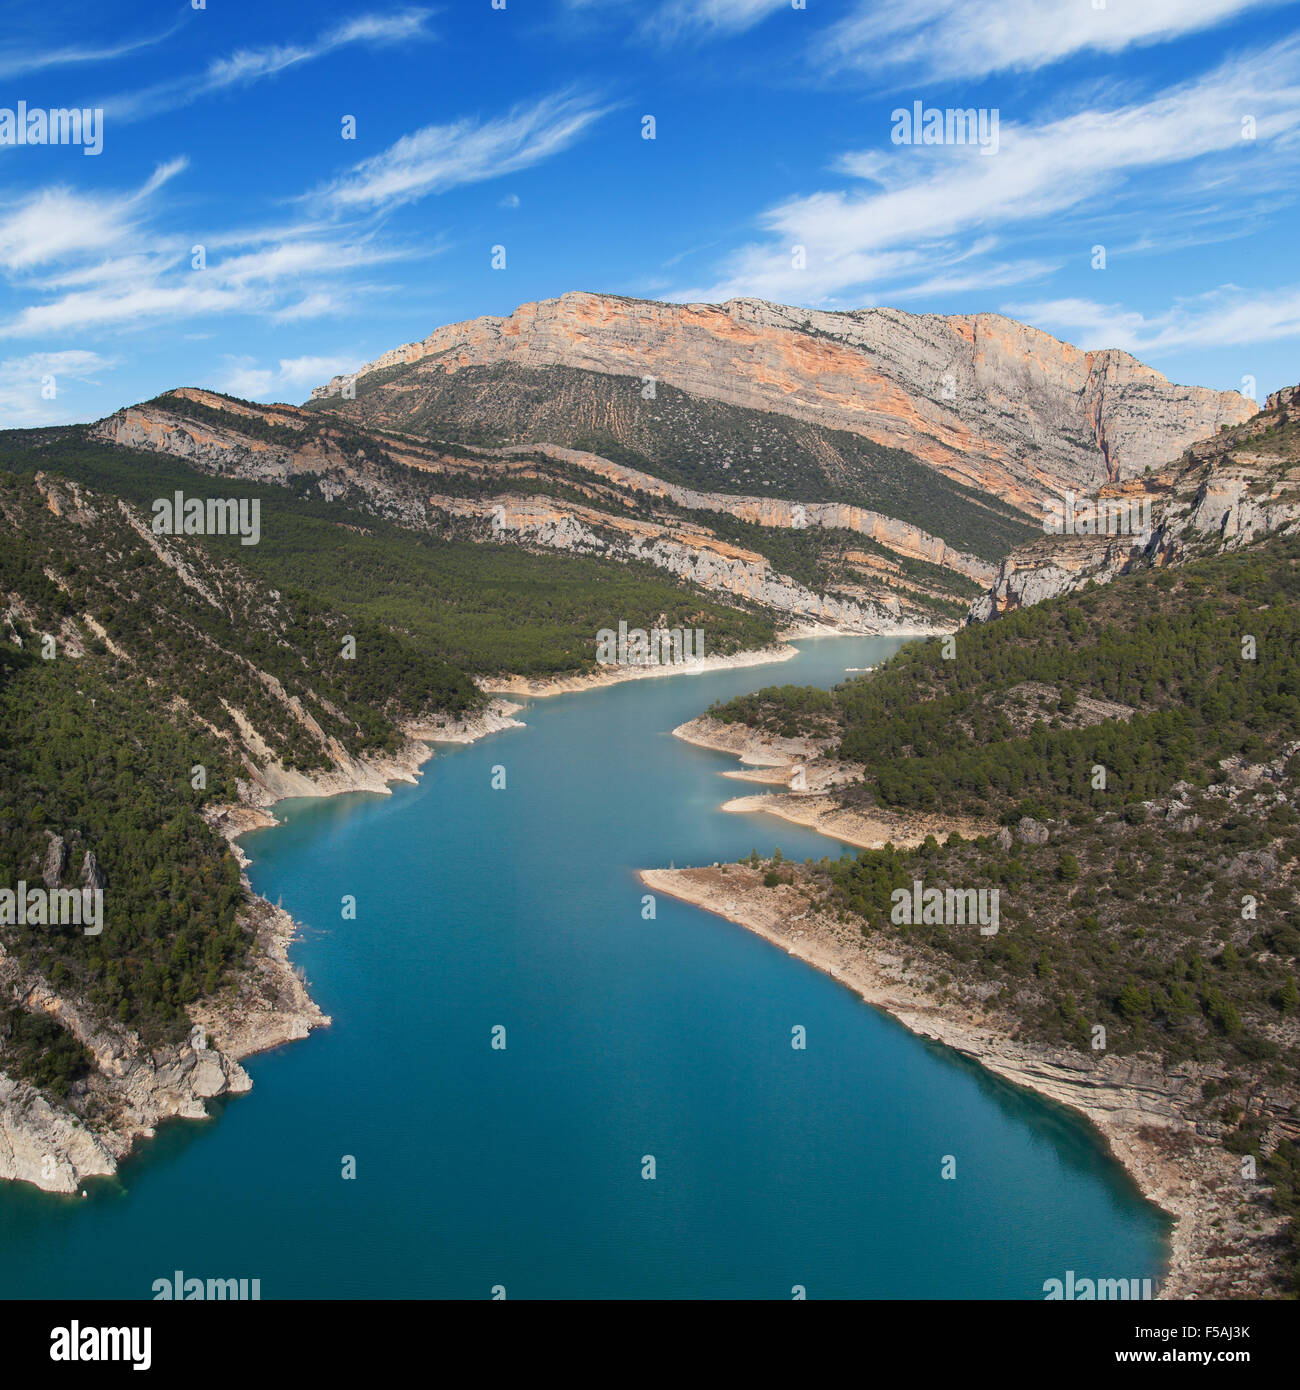 The Montsec and the Canelles reservoir in La Noguera, Lleida, Catalonia. Stock Photo